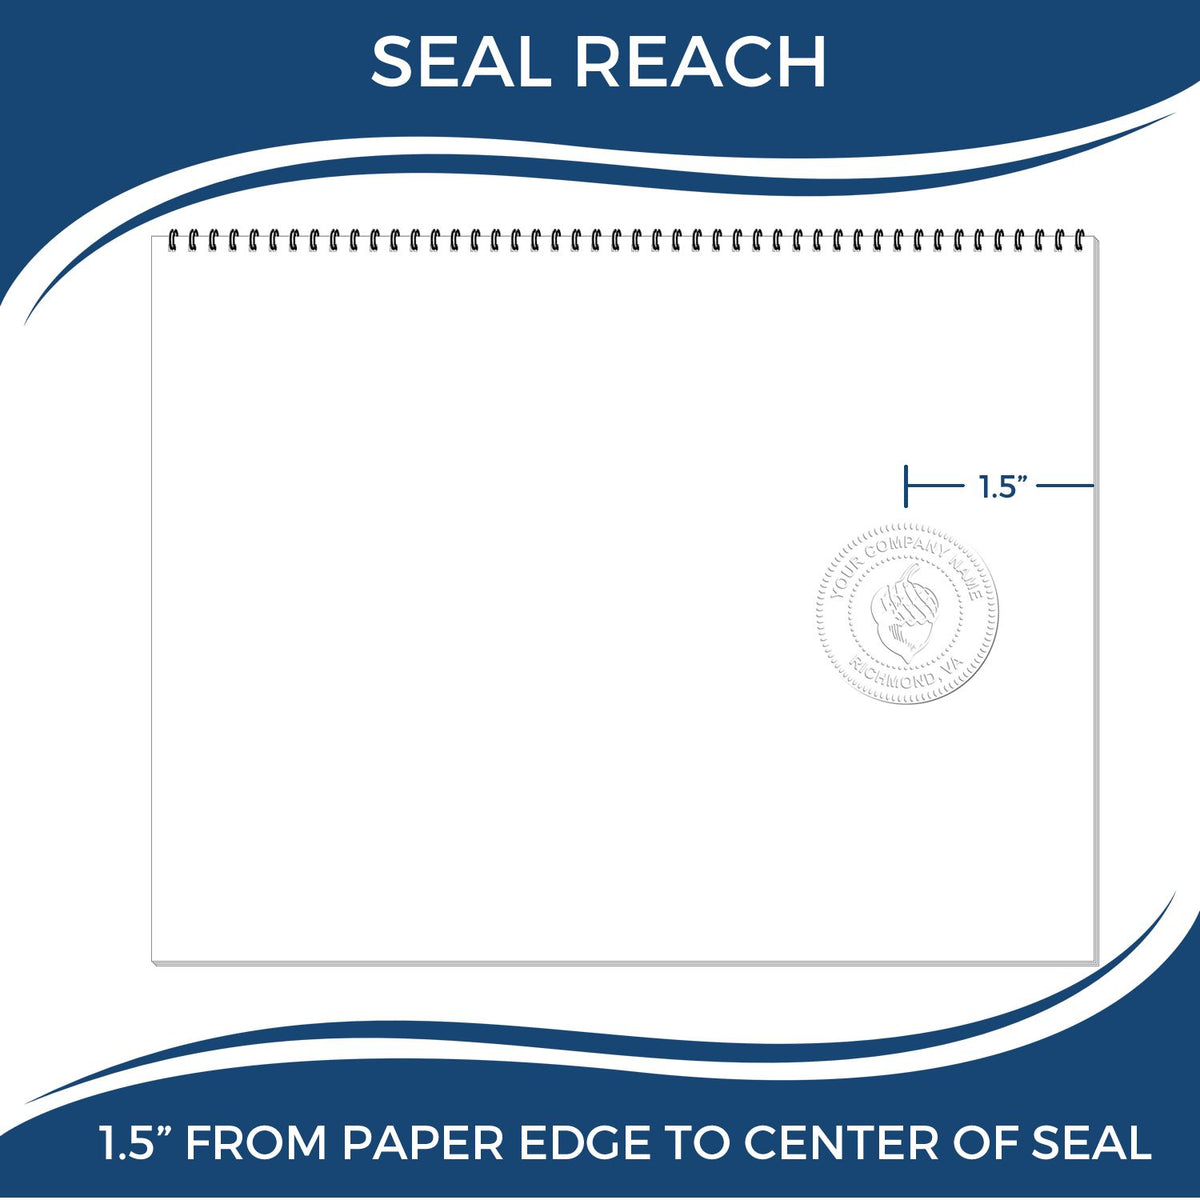 An infographic showing the seal reach which is represented by a ruler and a miniature seal image of the Handheld Montana Professional Geologist Embosser